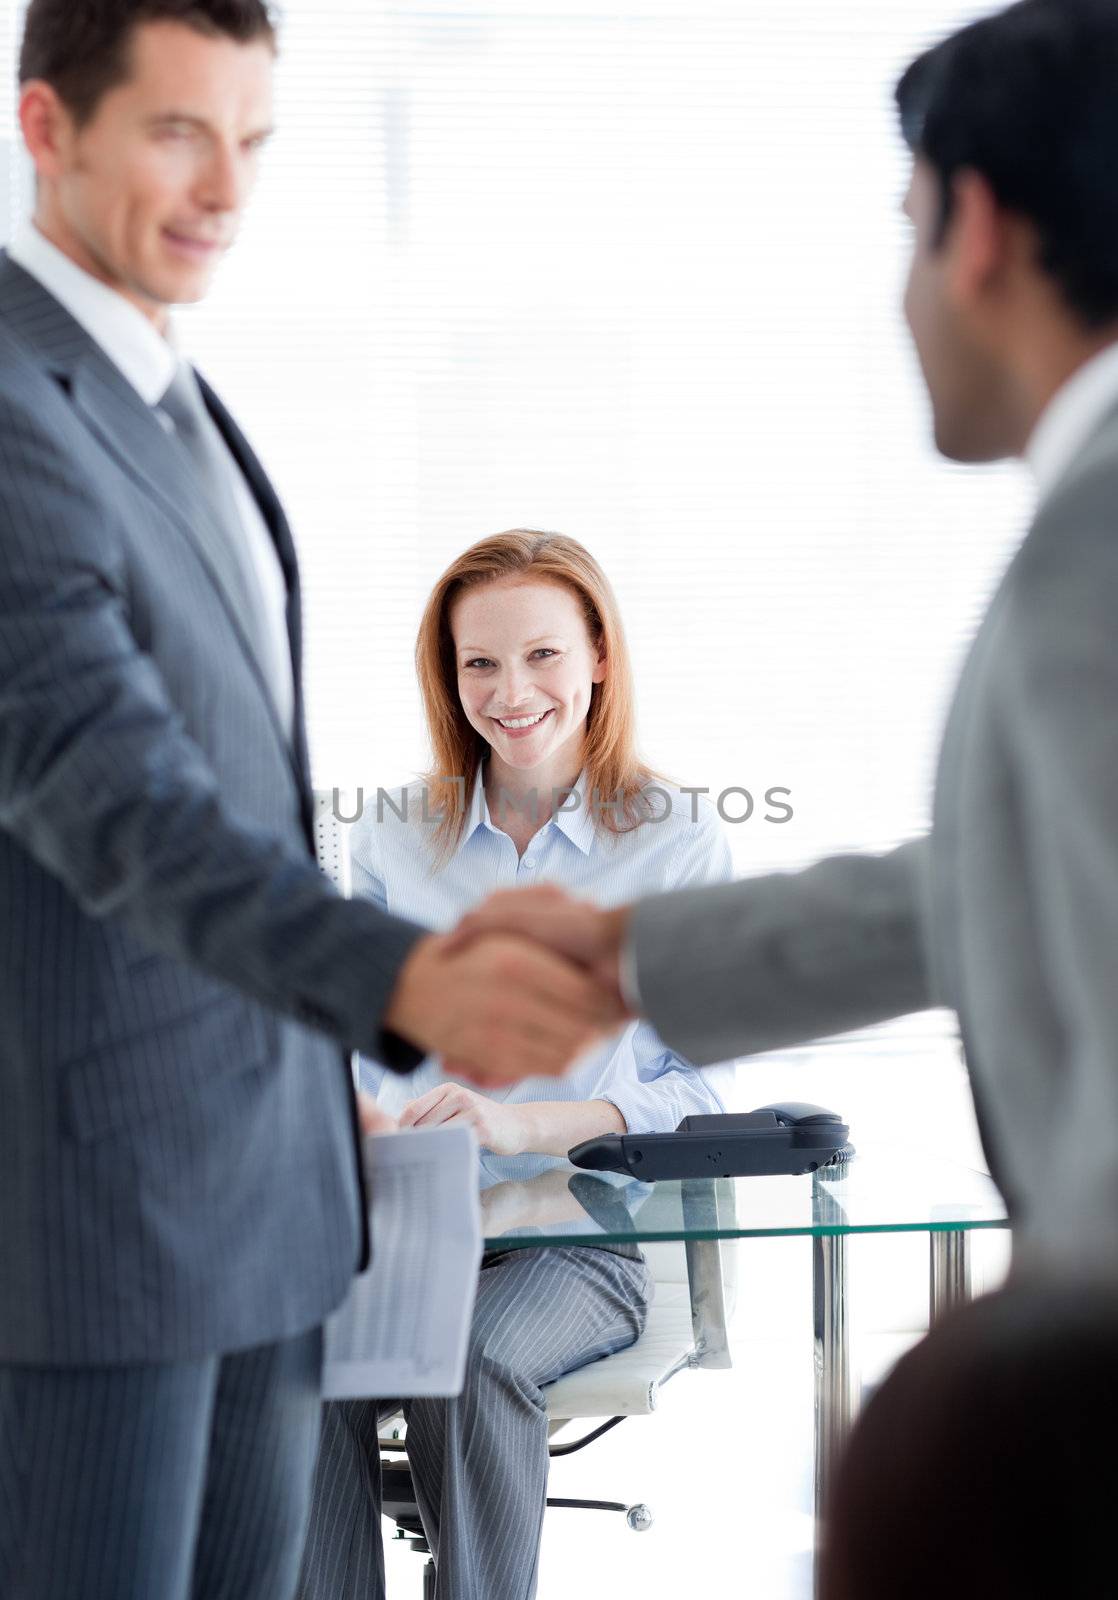 International businessmen greeting each other at a job interview by Wavebreakmedia